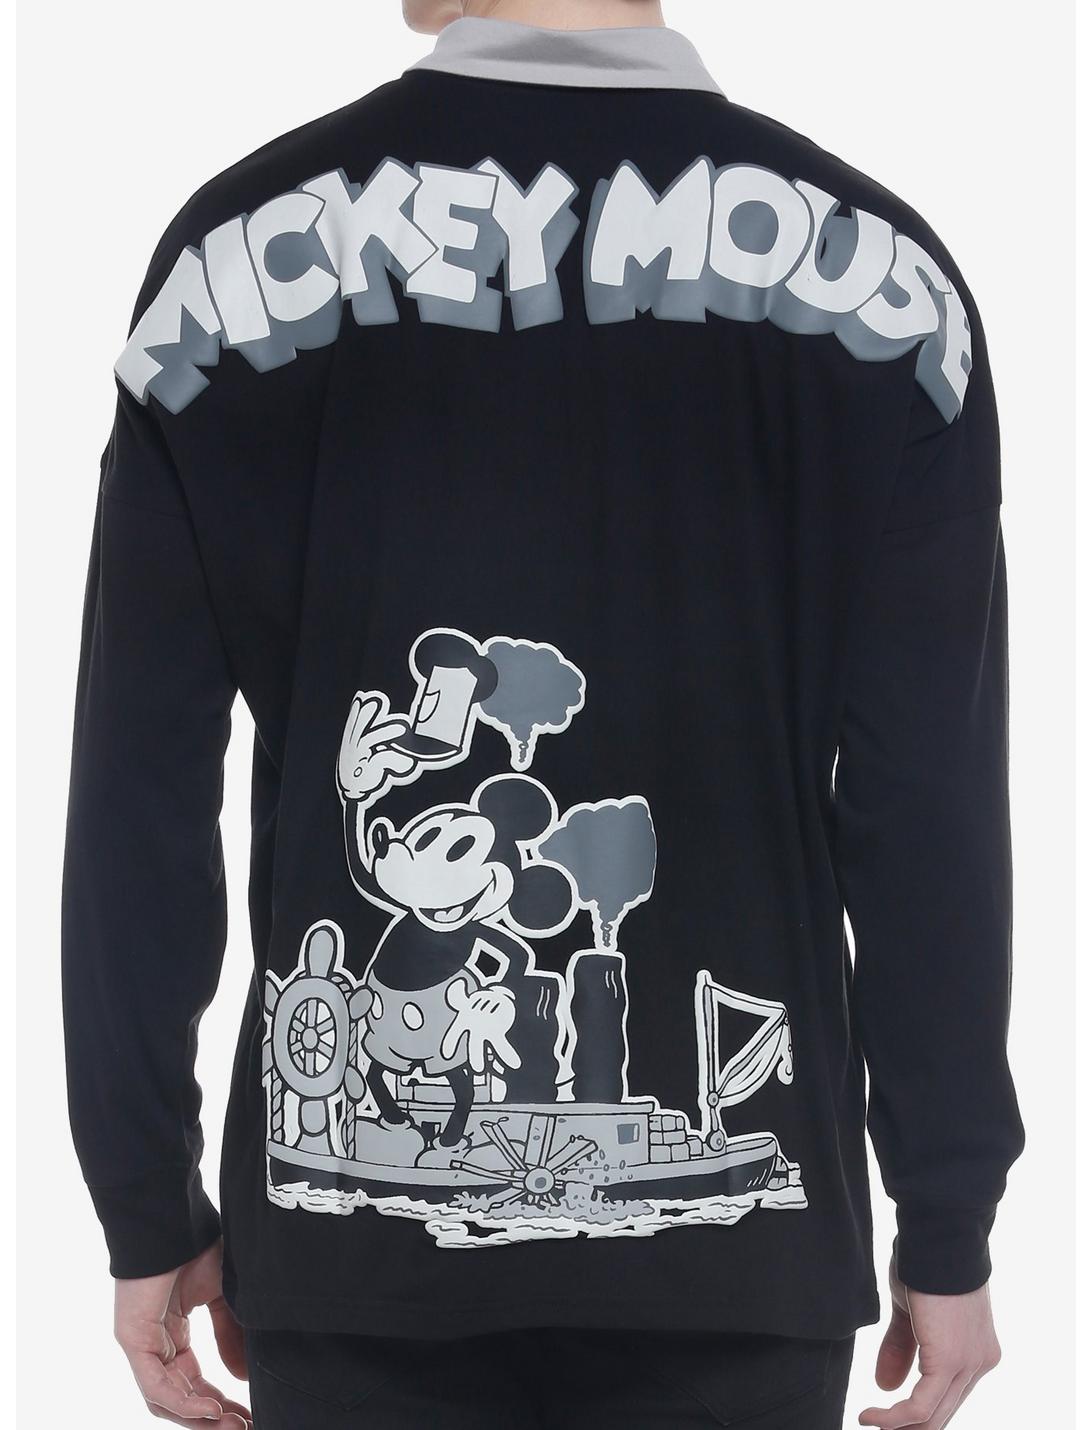 Our Universe Disney100 Mickey Mouse Steamboat Willie Athletic Jersey, BLACK  GREY  WHITE, hi-res